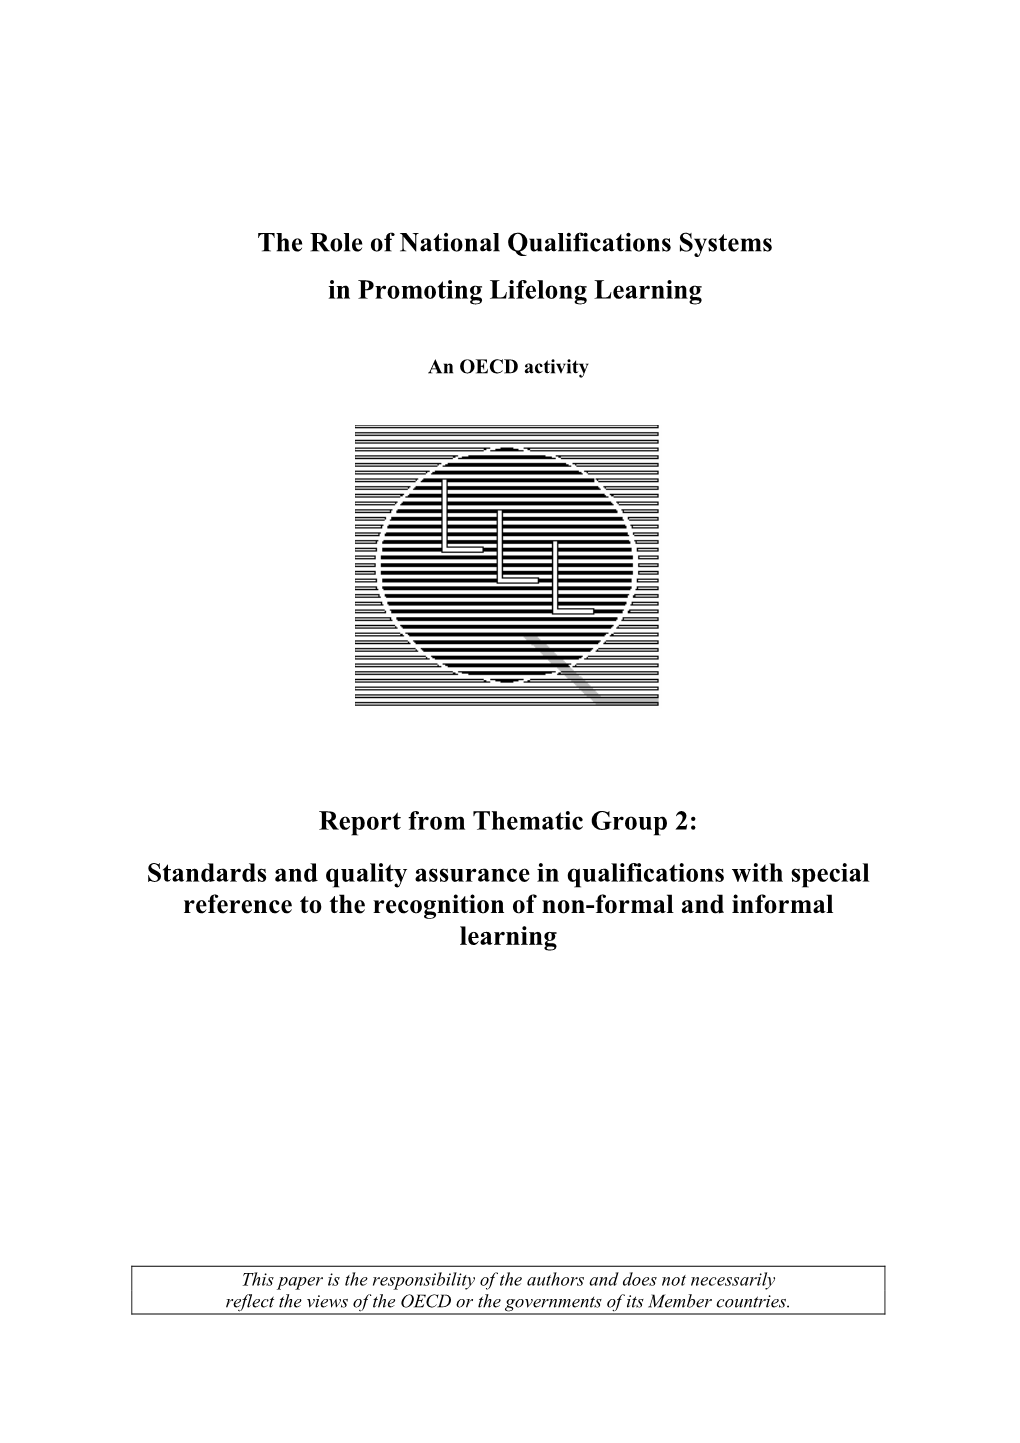 The Role of National Qualifications Systems in Promoting Lifelong Learning